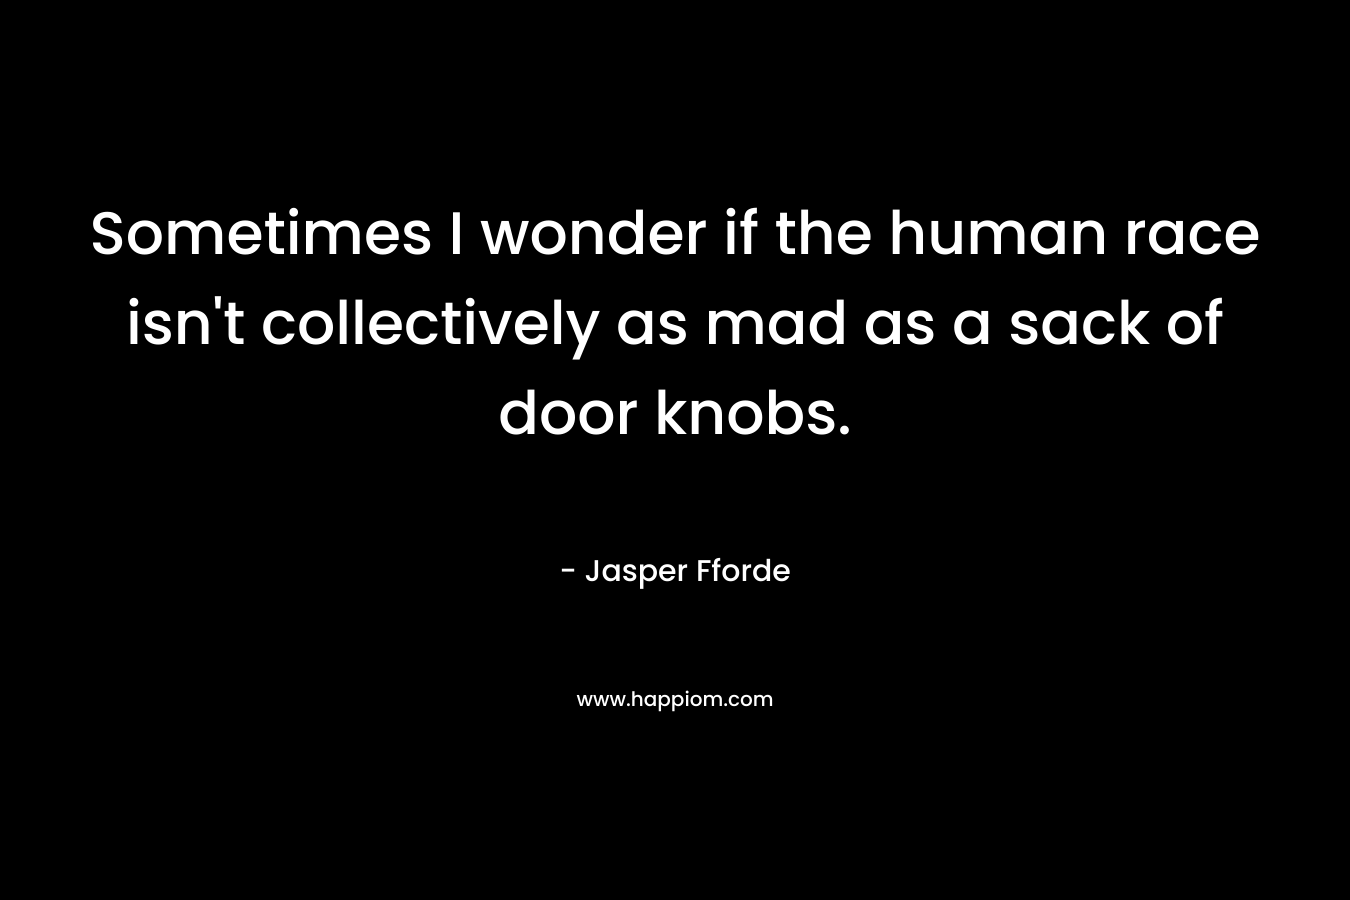 Sometimes I wonder if the human race isn't collectively as mad as a sack of door knobs.